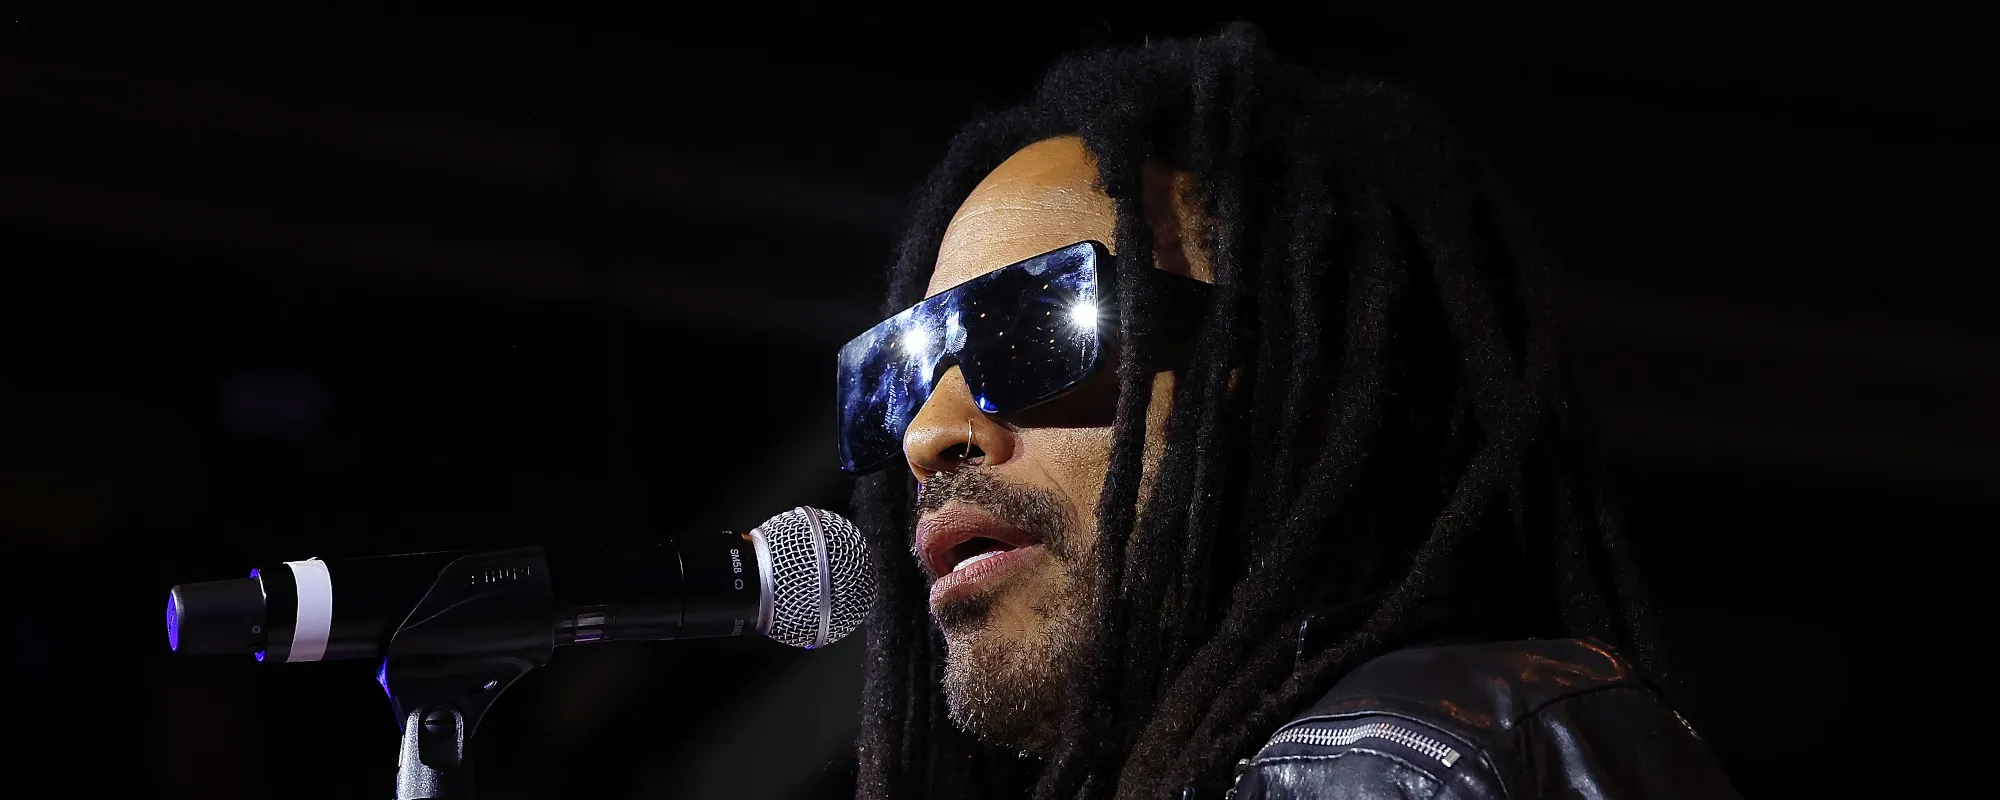 The Story and Meaning Behind “Let Love Rule” by Lenny Kravitz